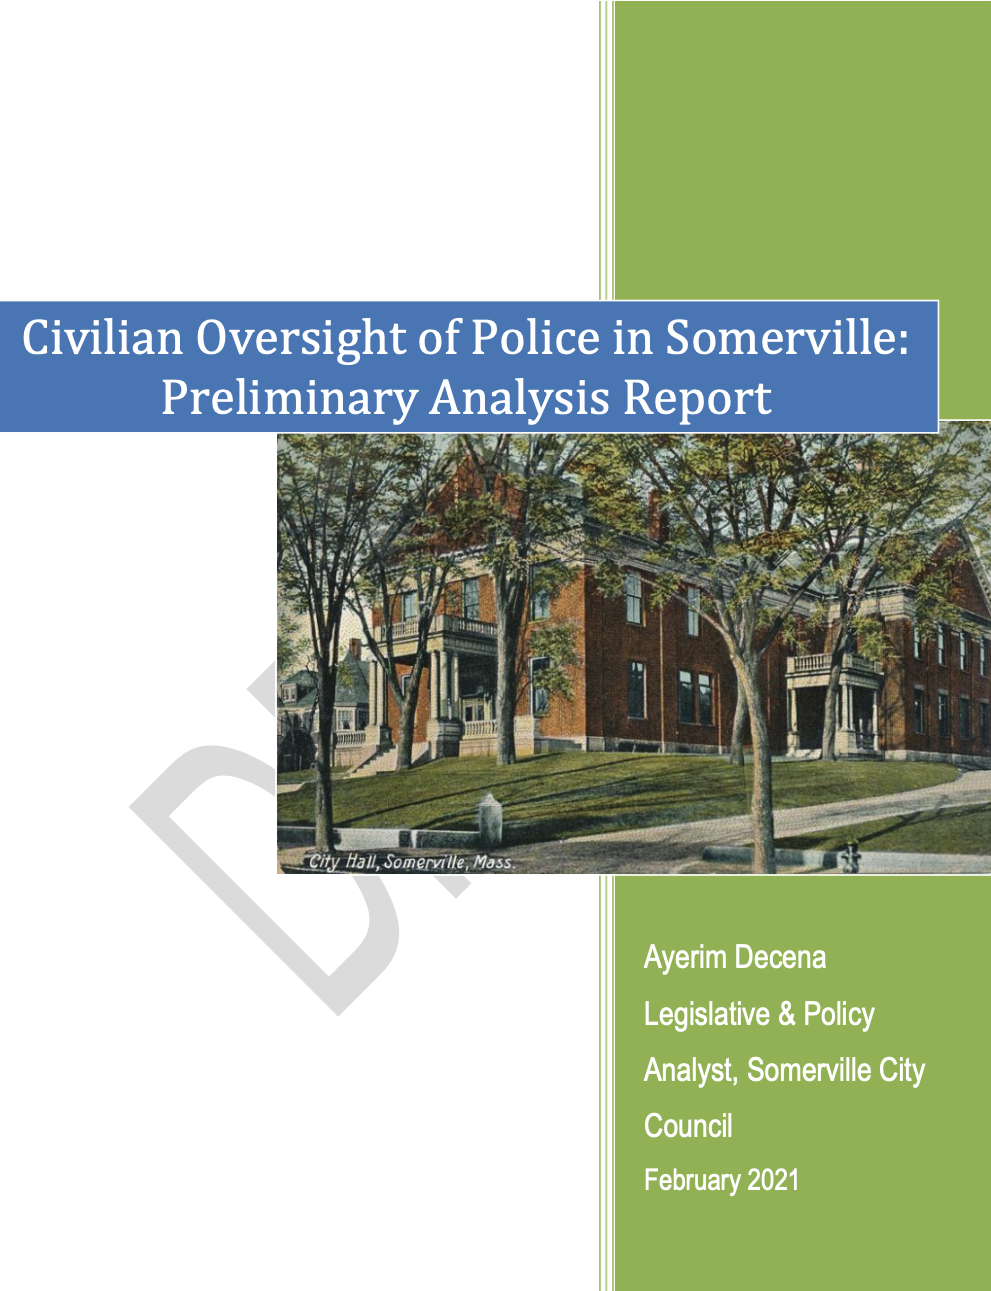  Civilian Oversight of Police in Somerville: Preliminary Analysis Report (Draft)